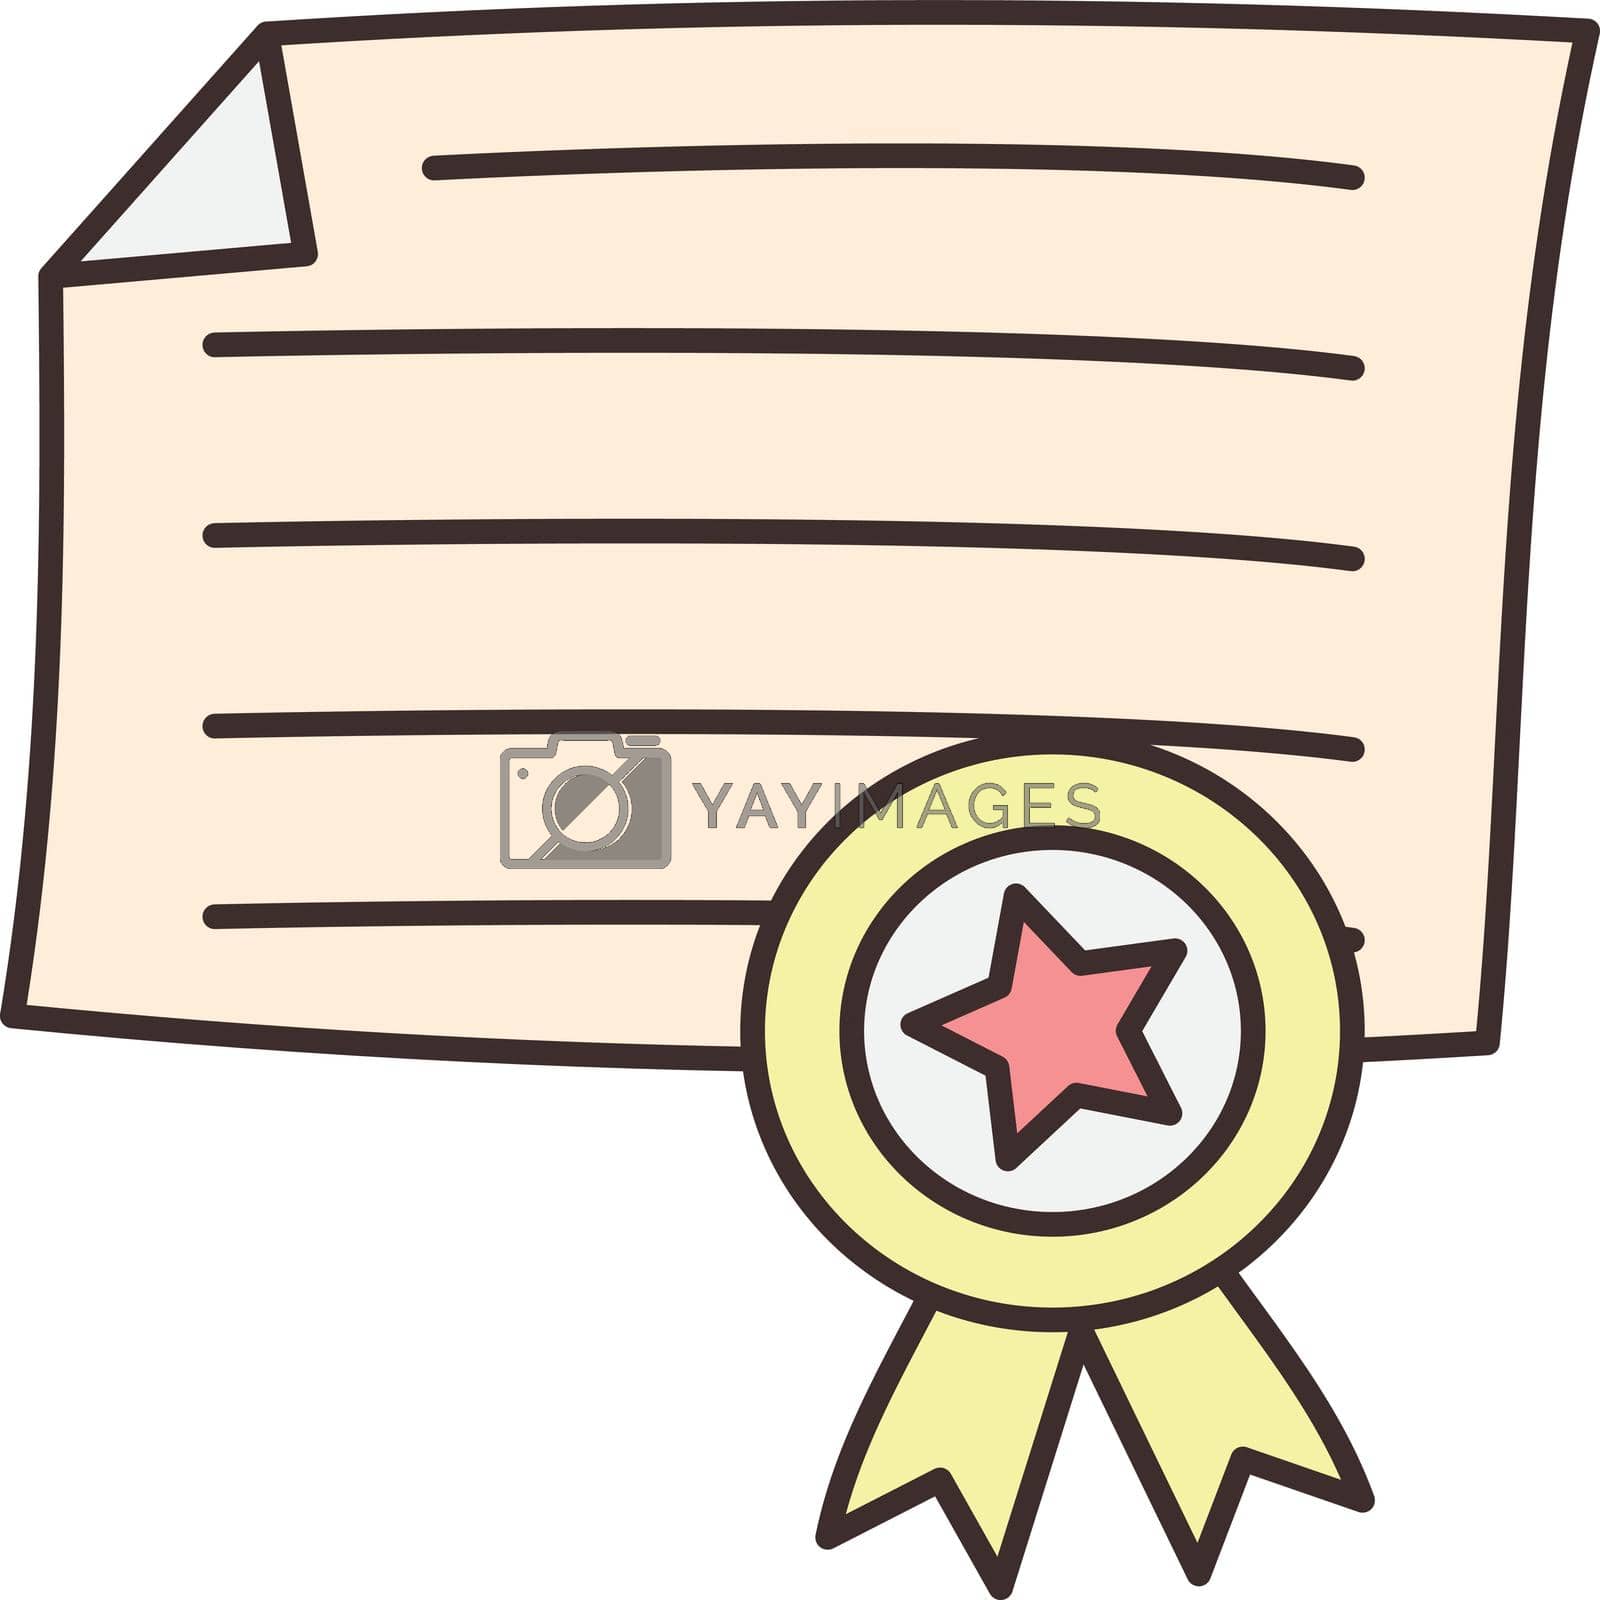 Royalty free image of certificate by FlaticonsDesign